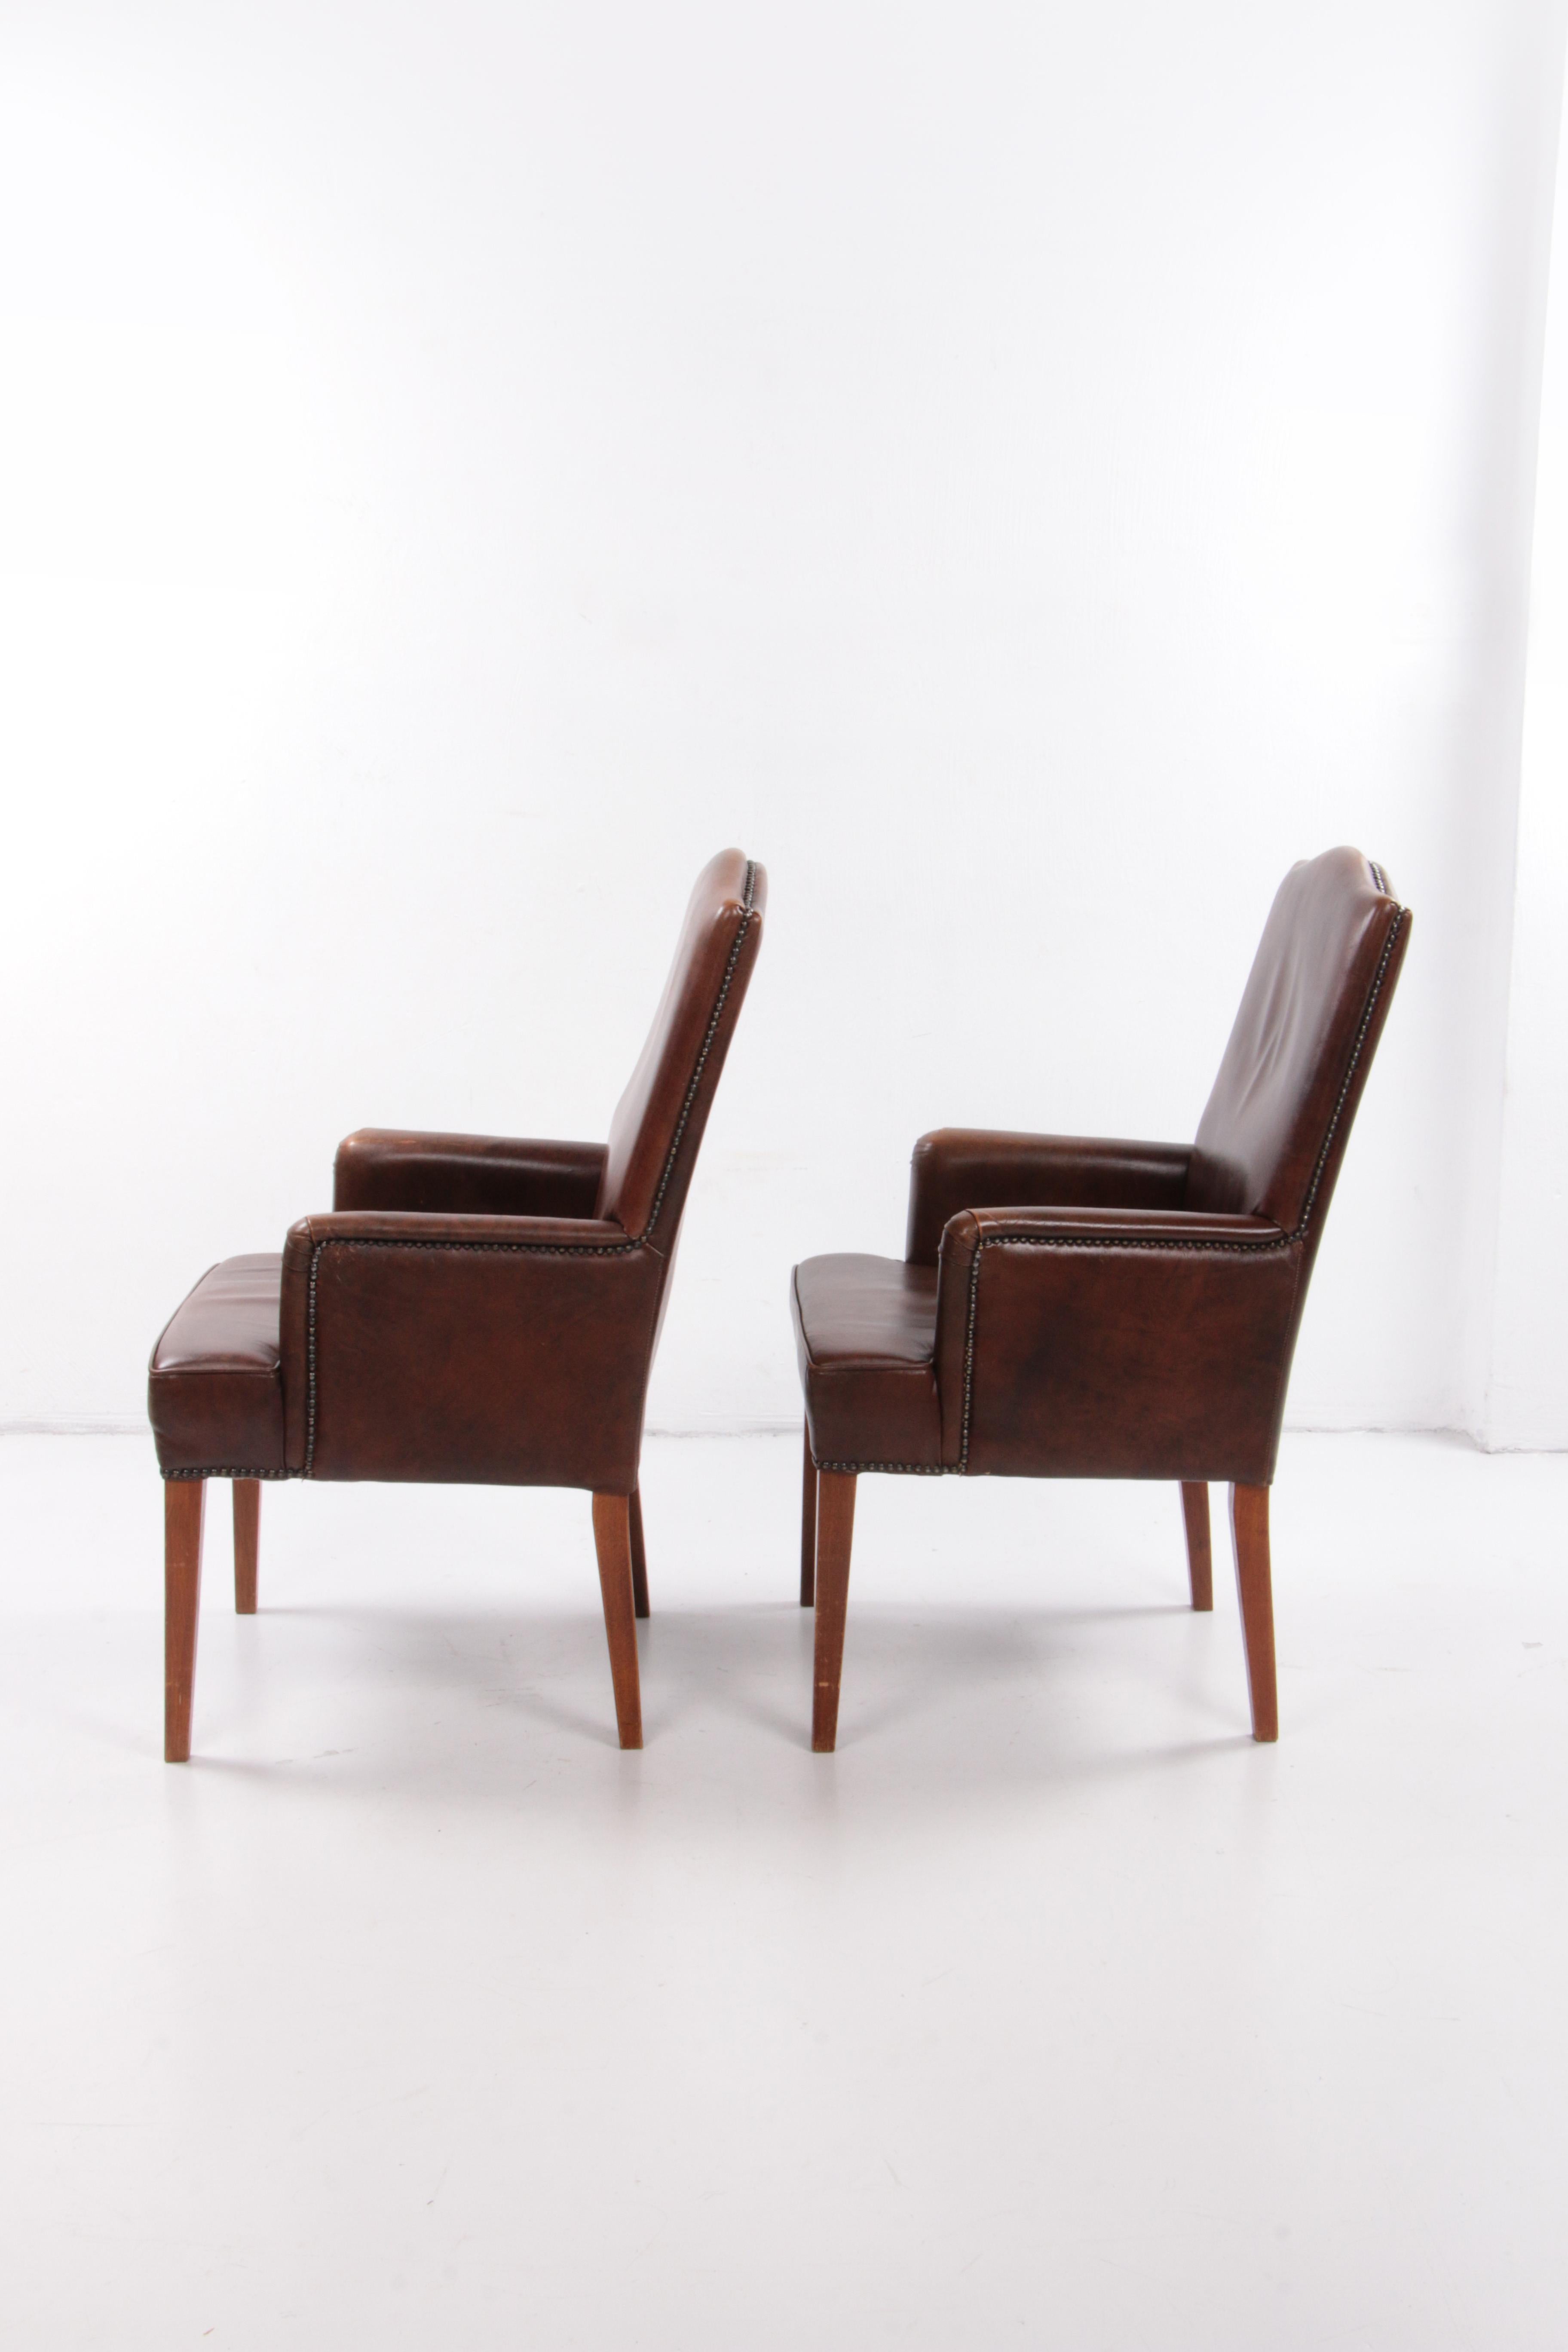 Dutch Set of 2 dining room chairs in sheep leather, 1970 Netherlands. For Sale